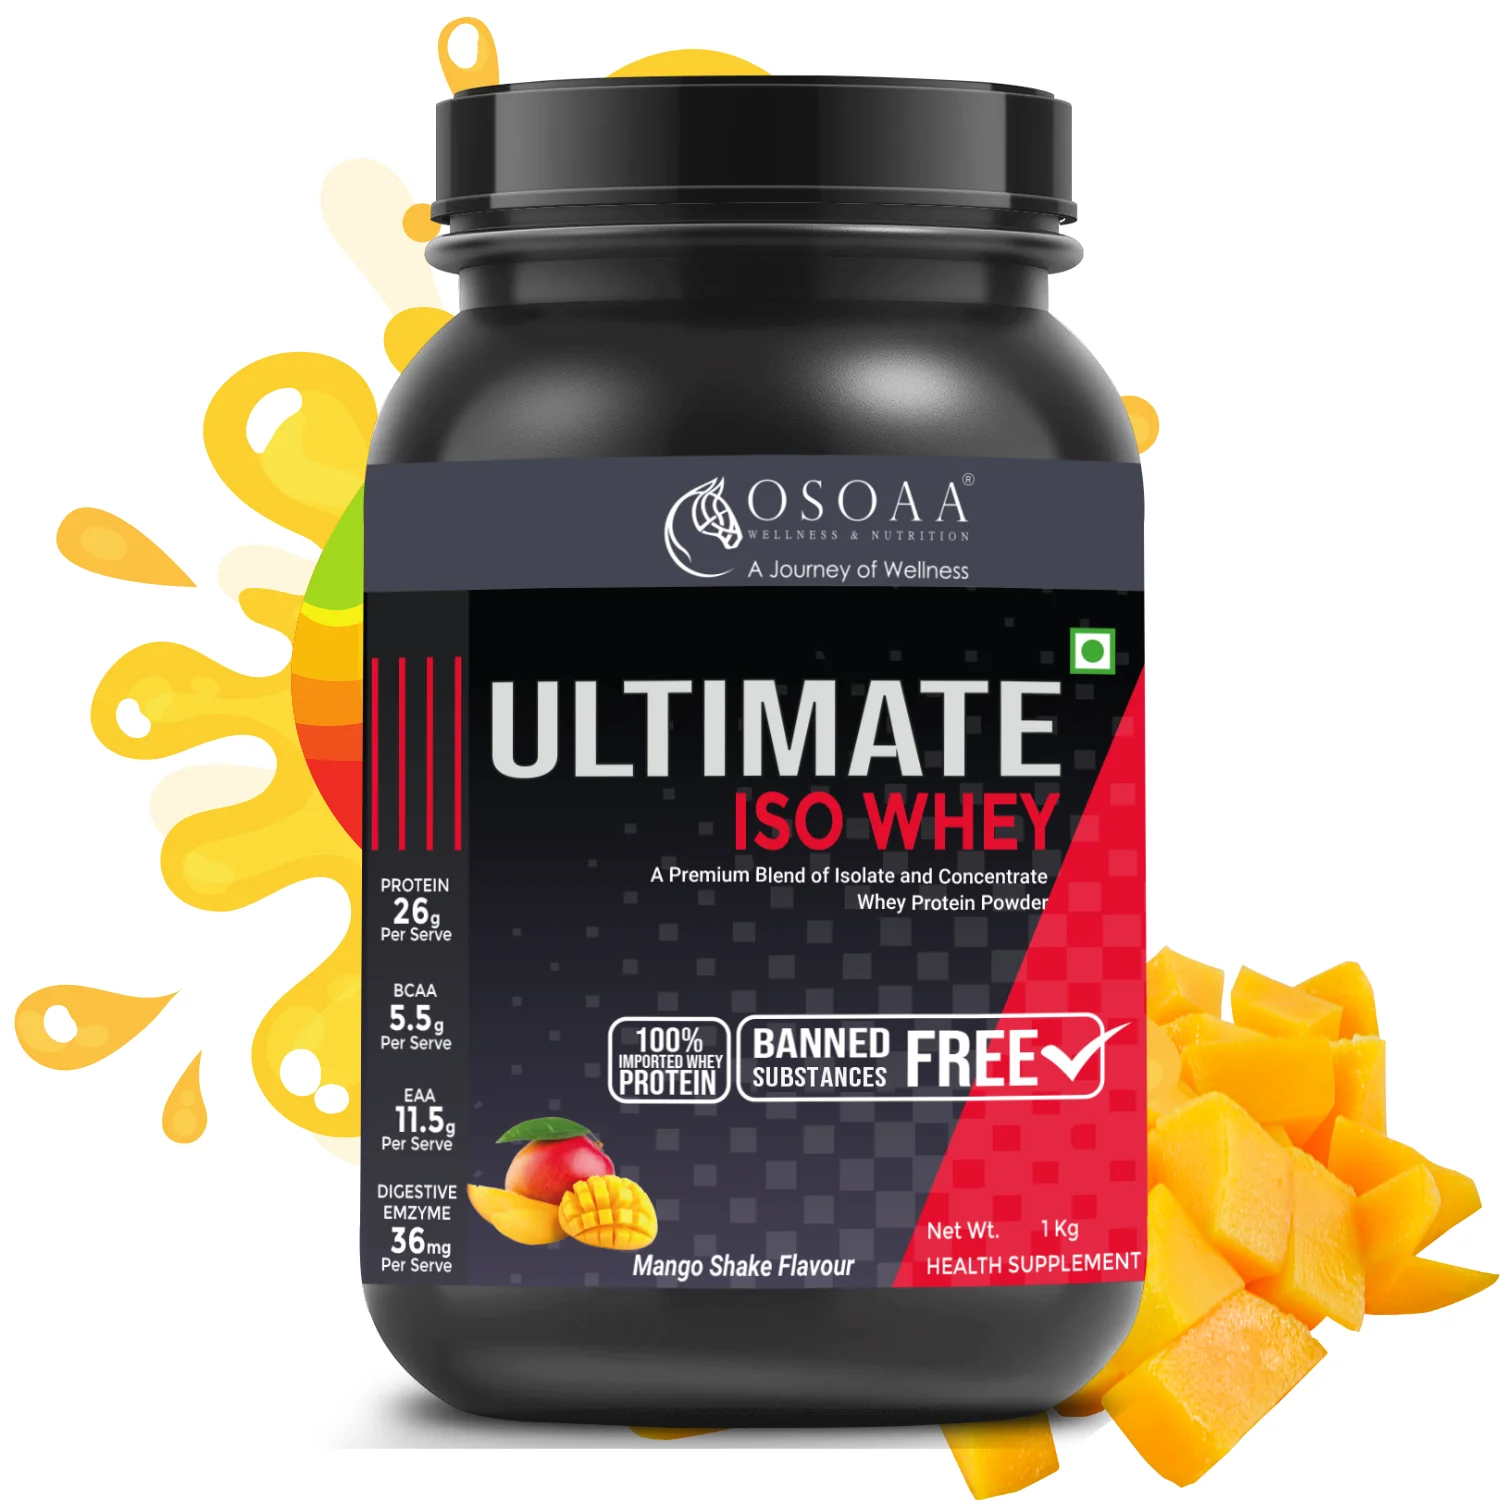 OSOAA Whey Ultimate Iso Whey | 26g Prote...